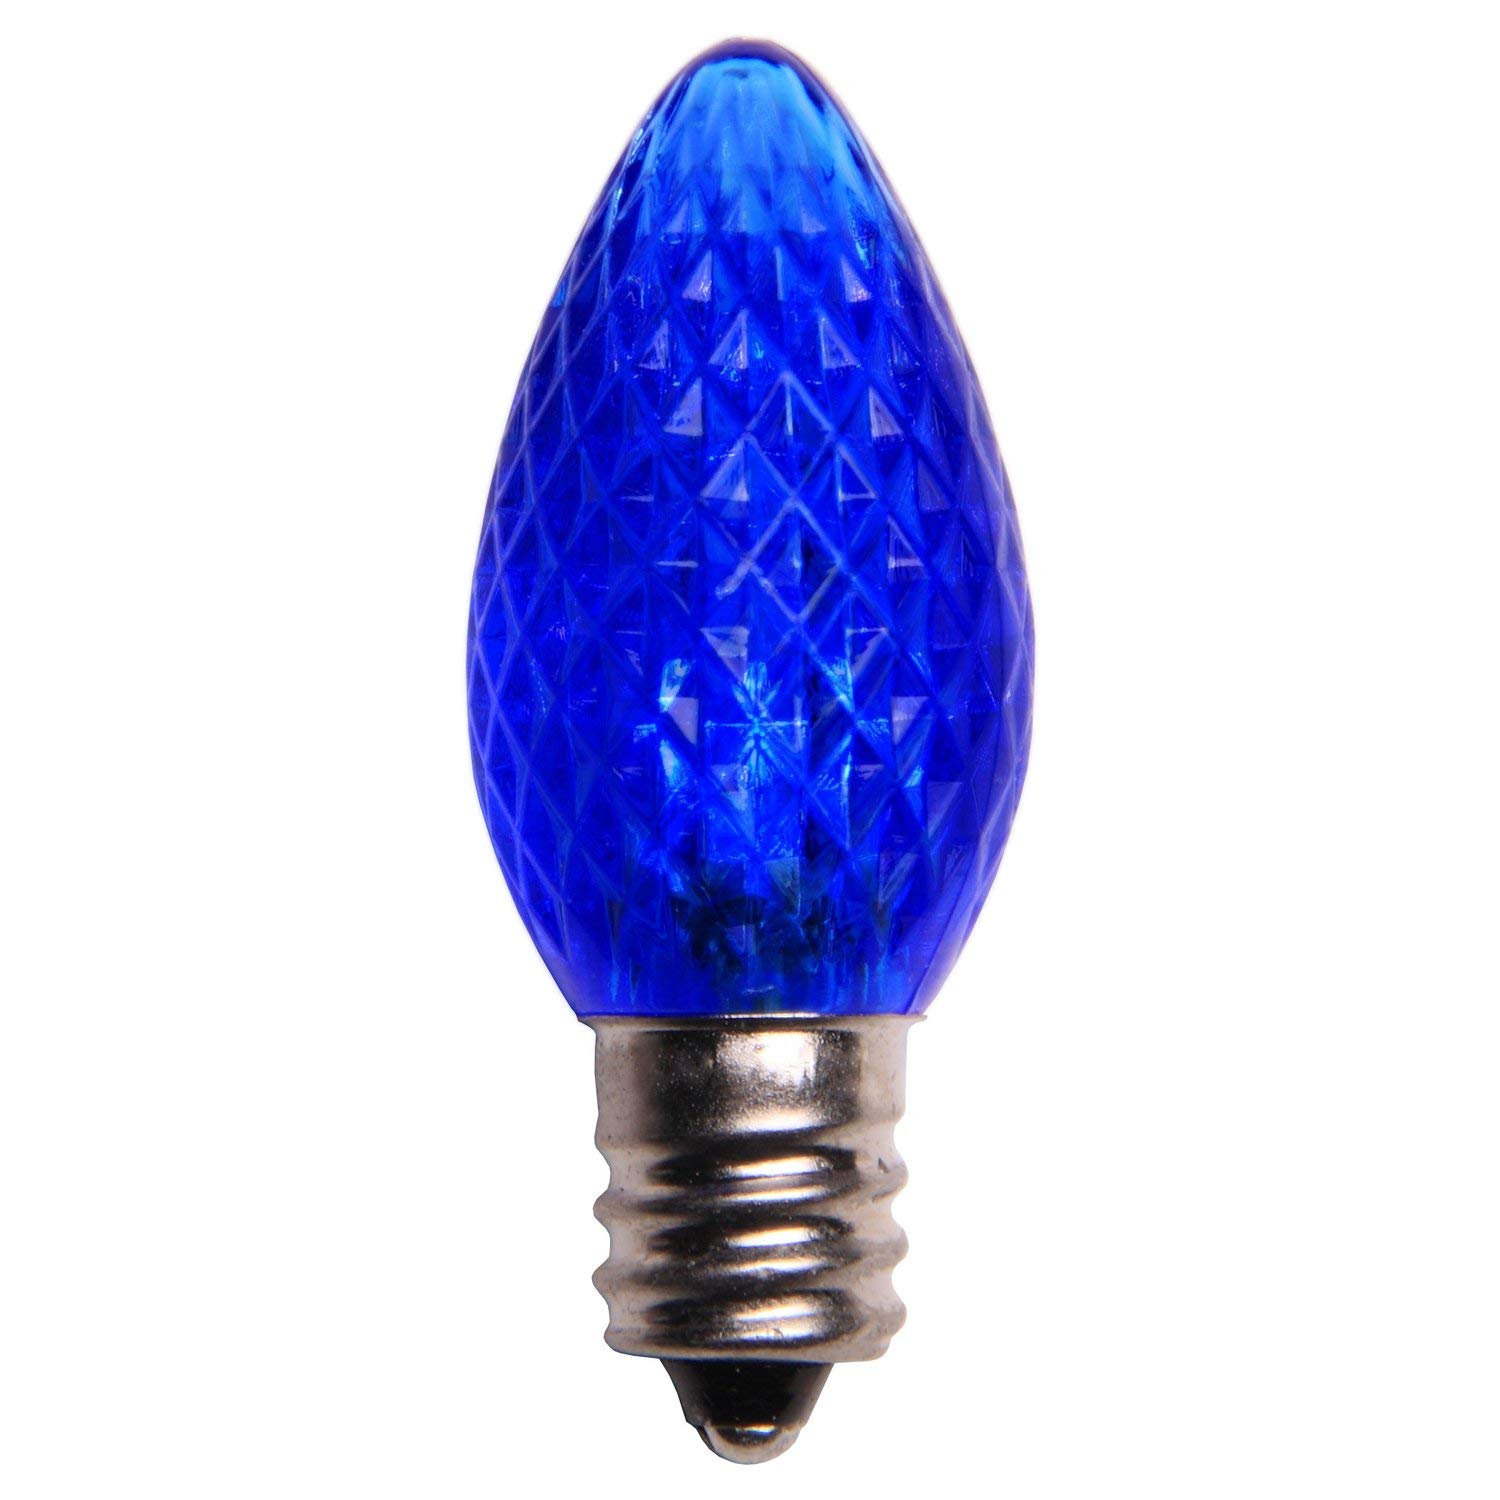 Amazon.com: Holiday Lighting Outlet LED C7 Blue Replacement ...